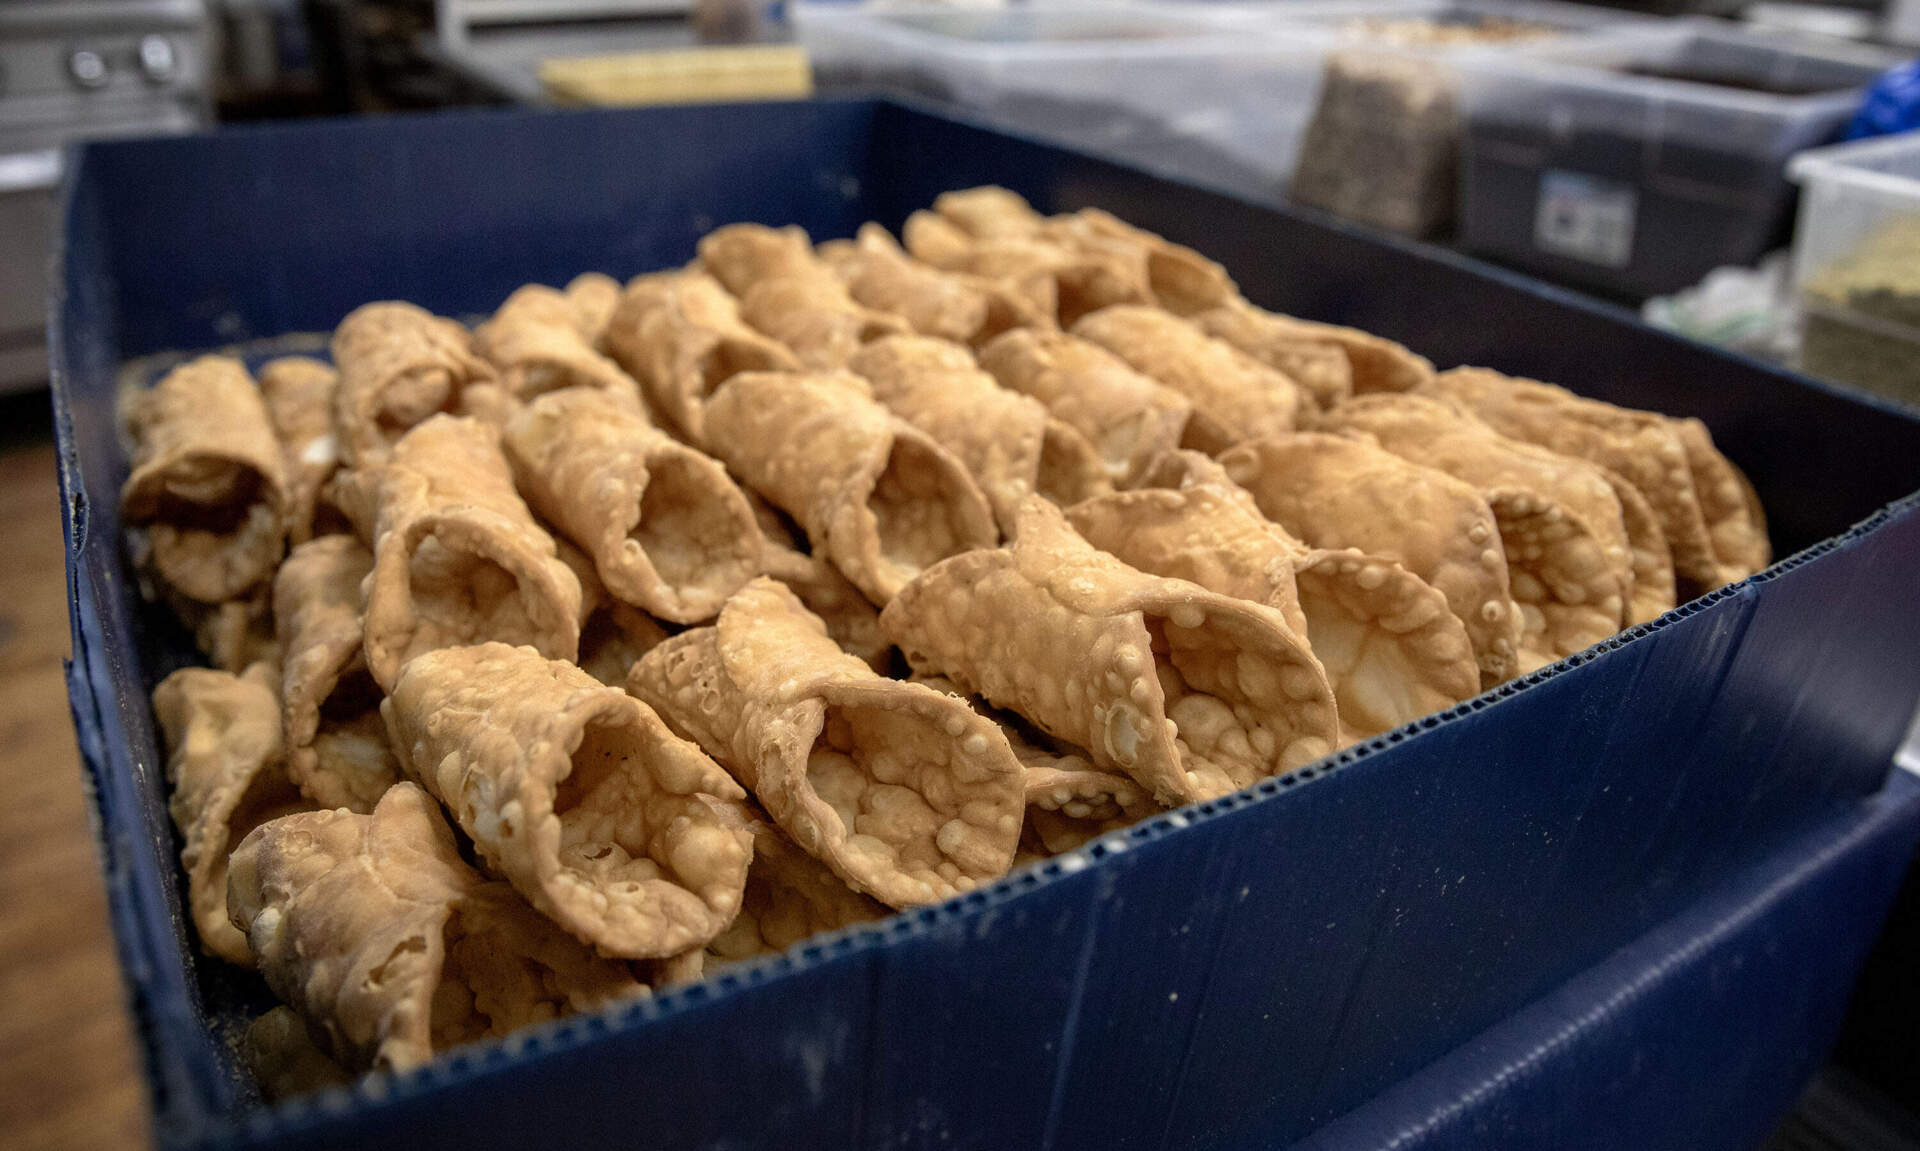 Cannoli shells baked and waiting to be filled at Mike's Pastry. (Robin Lubbock/WBUR)